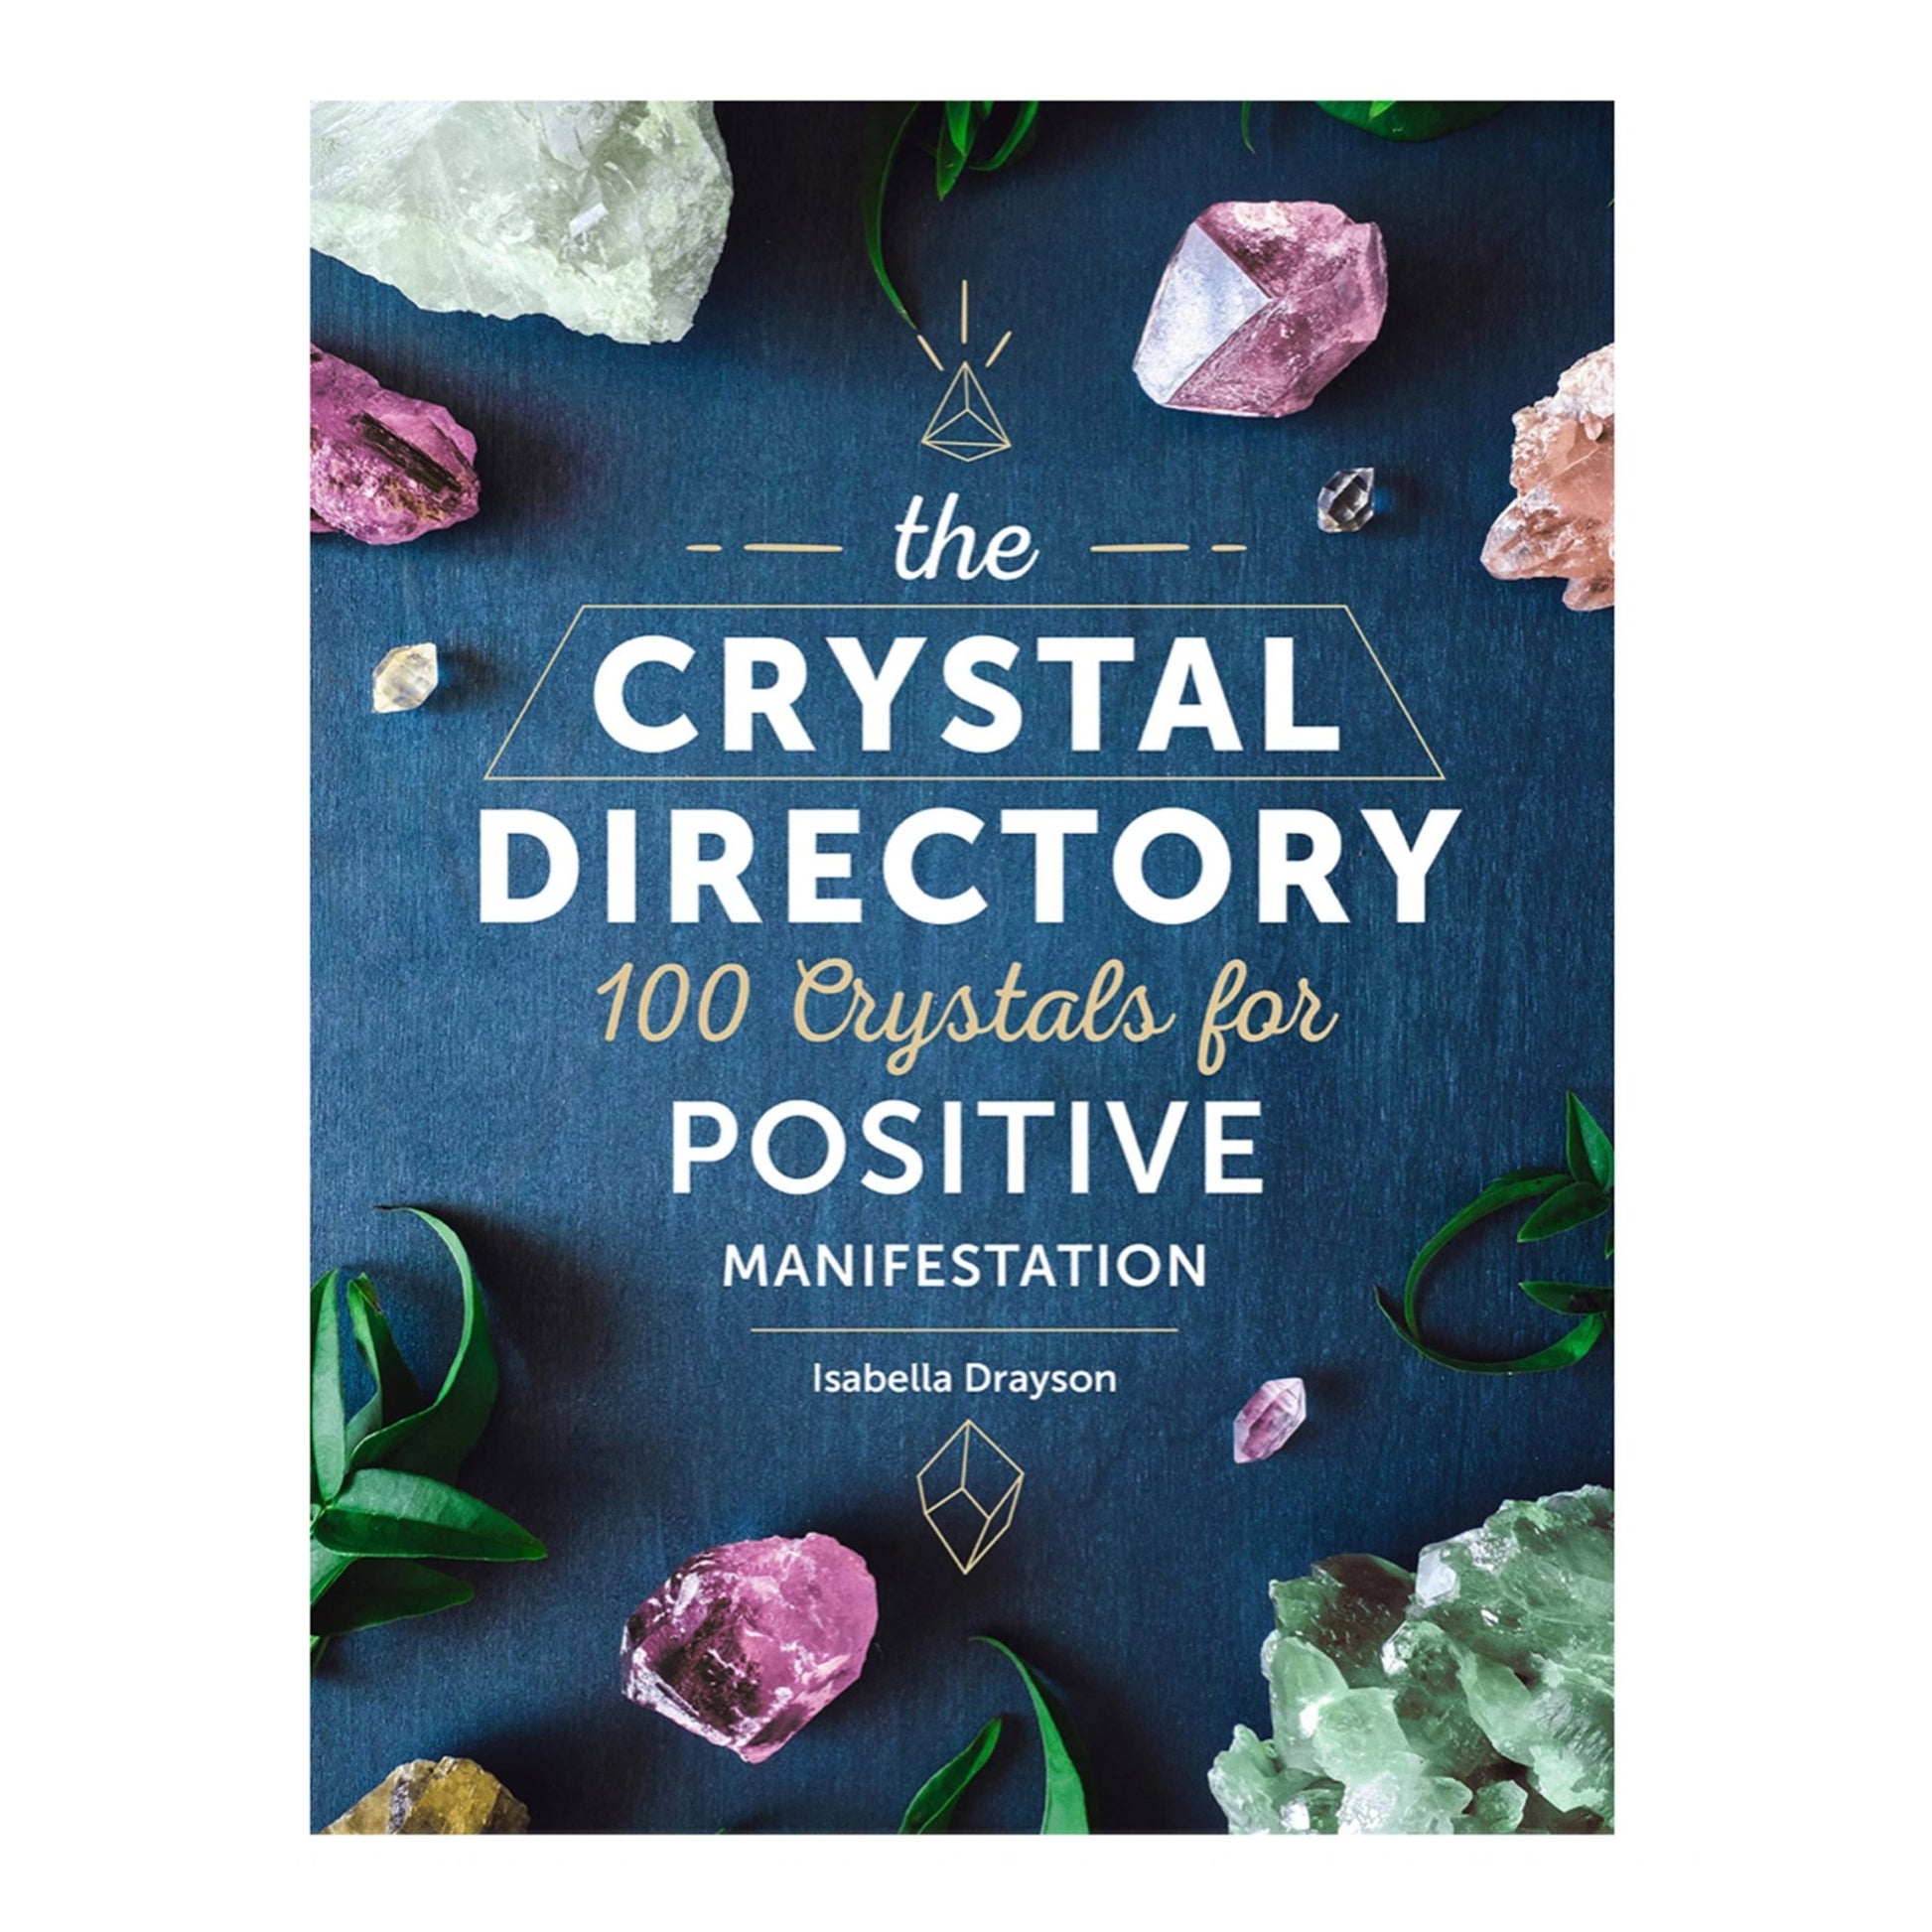 The Crystal Directory: 100 Crystals For Positive Manifestation - Muse + Moonstone